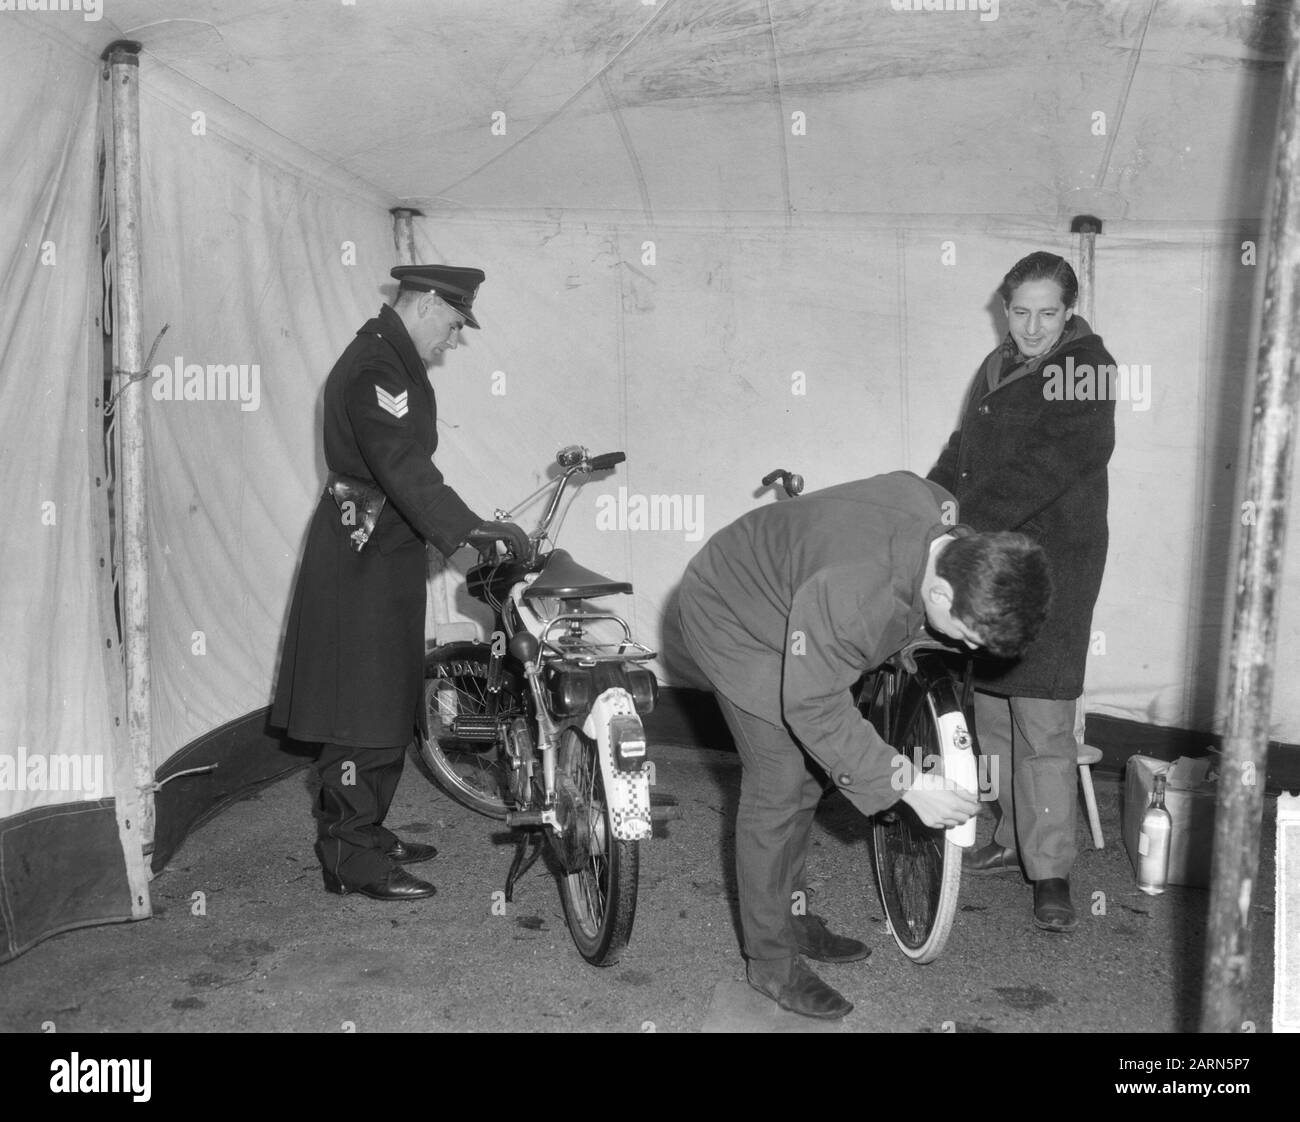 White mudguard without charge, the tent on the Museumplein Date: November 16, 1964 Keywords: fenders, tents Stock Photo